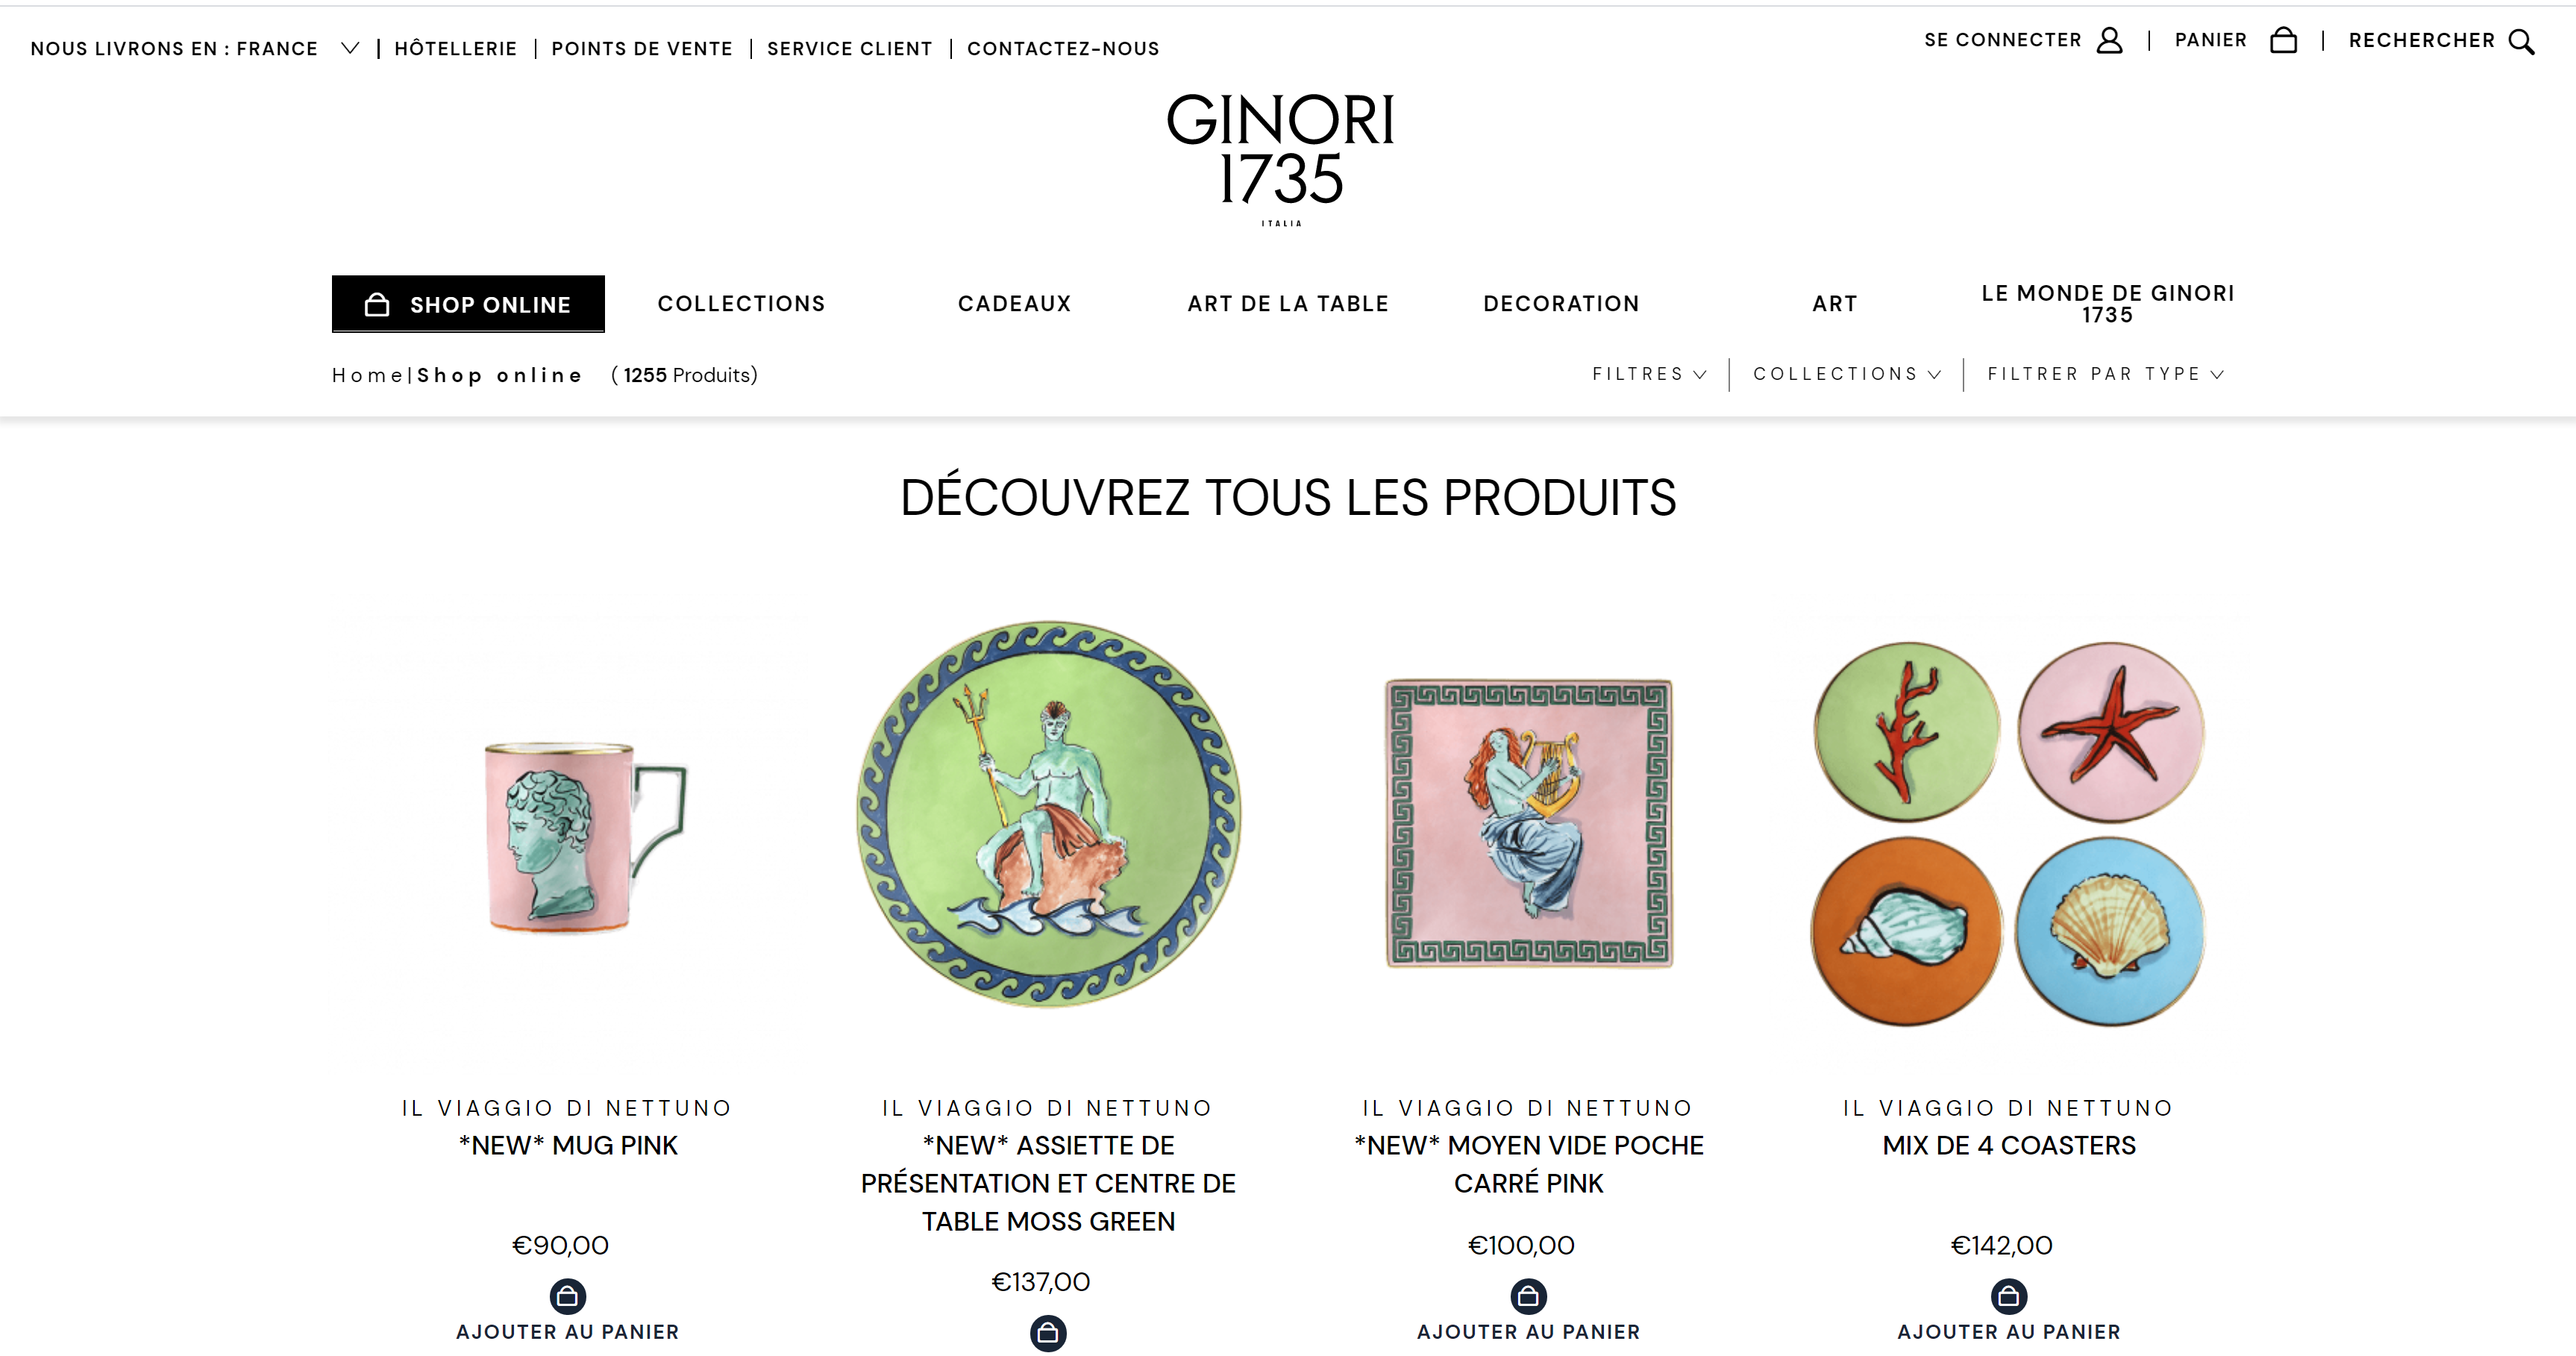 Richard Ginori decided to build its new website with Drupal and Commerce Layer.